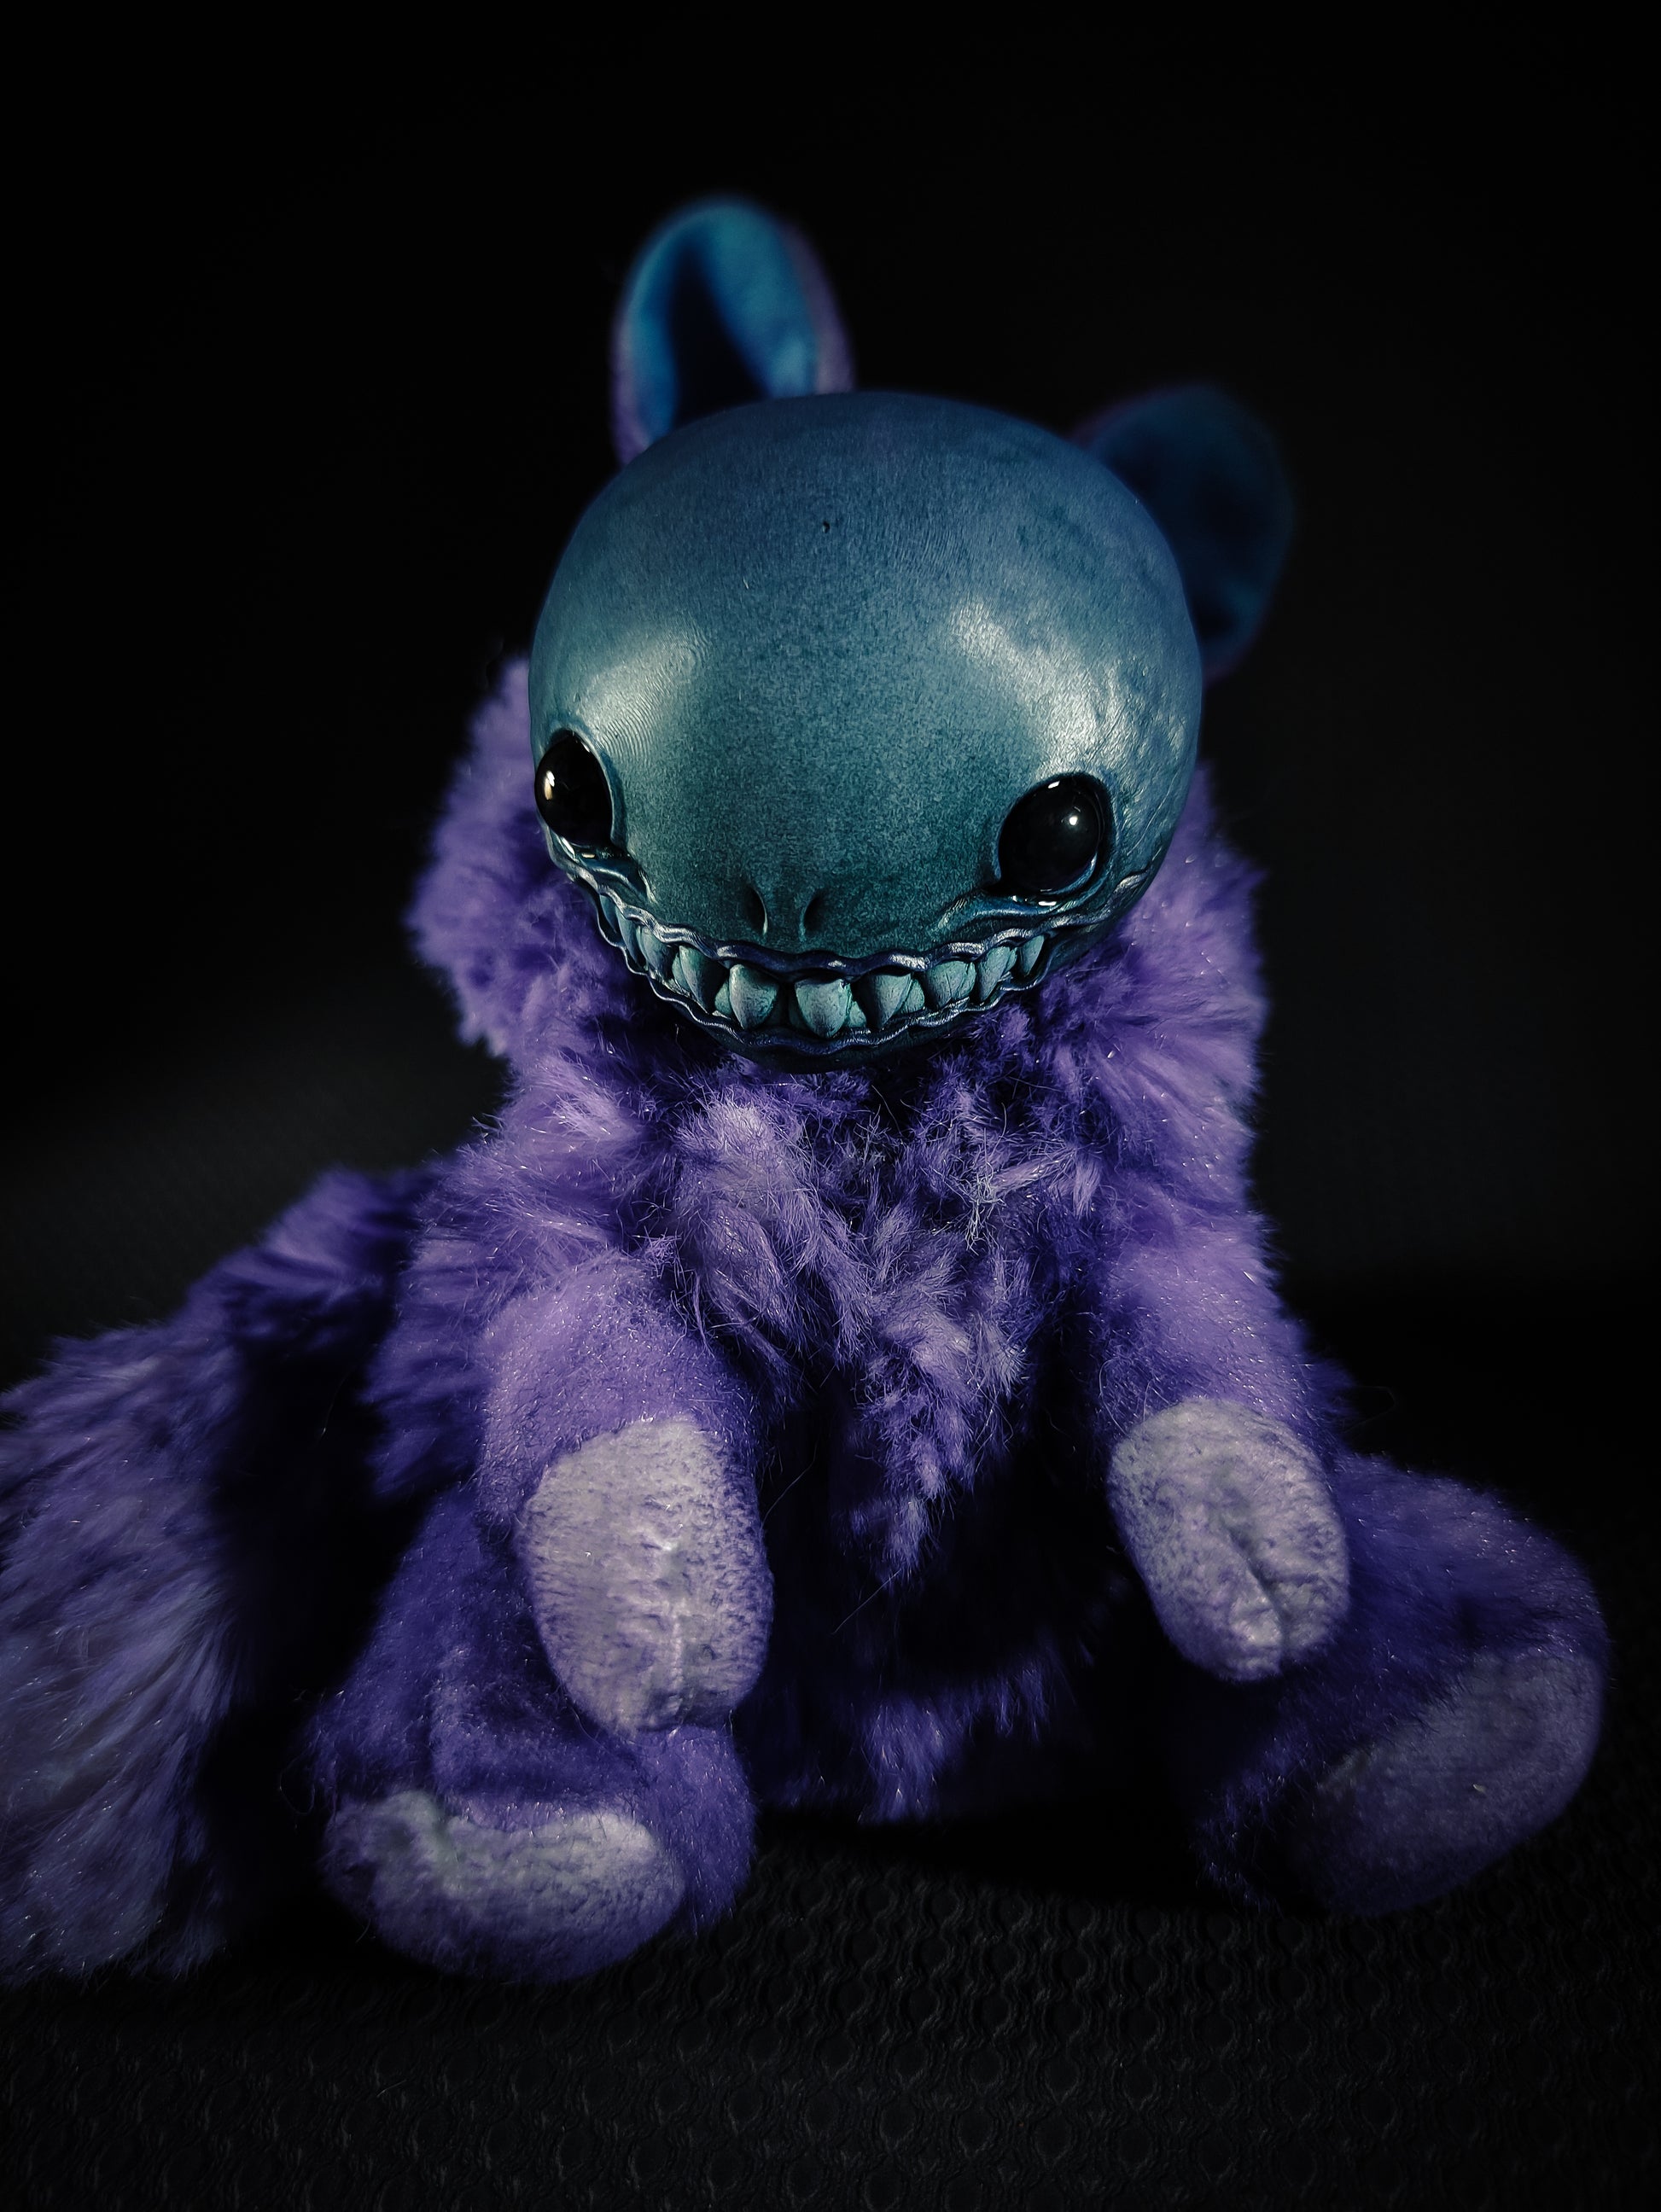 FRIEND Gloom Flavour - Cryptid Art Doll Plush Toy